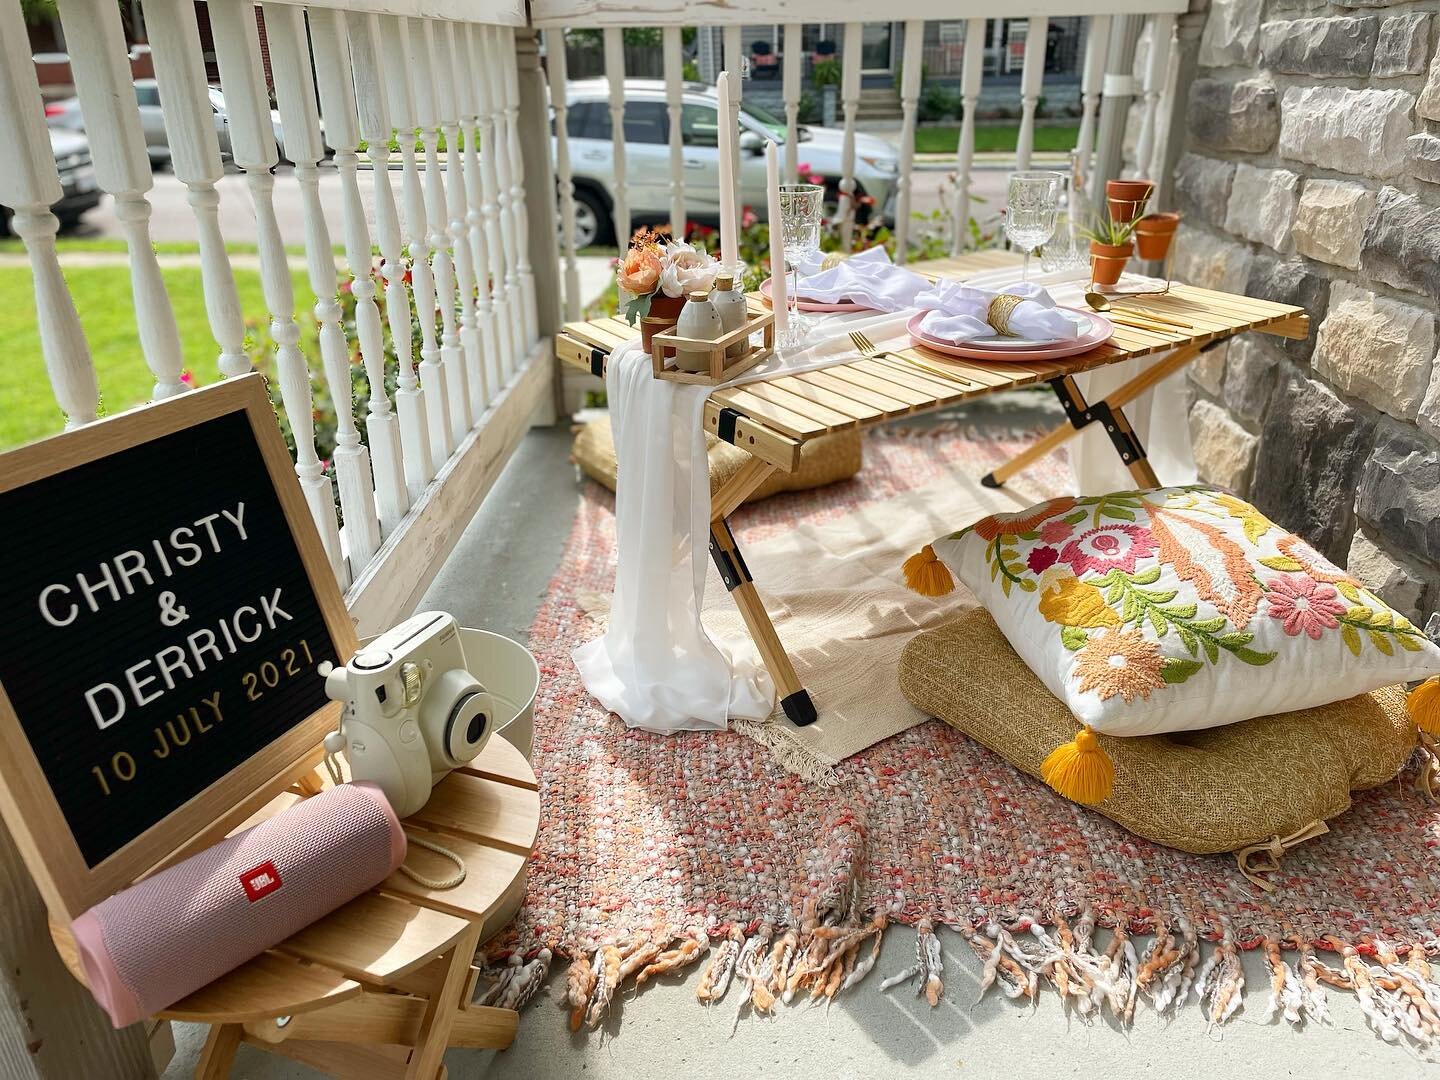 This back-up porch location was  the perfect set-up for our Pretty in Pink theme! It was even better when the sun came out after all. 💕